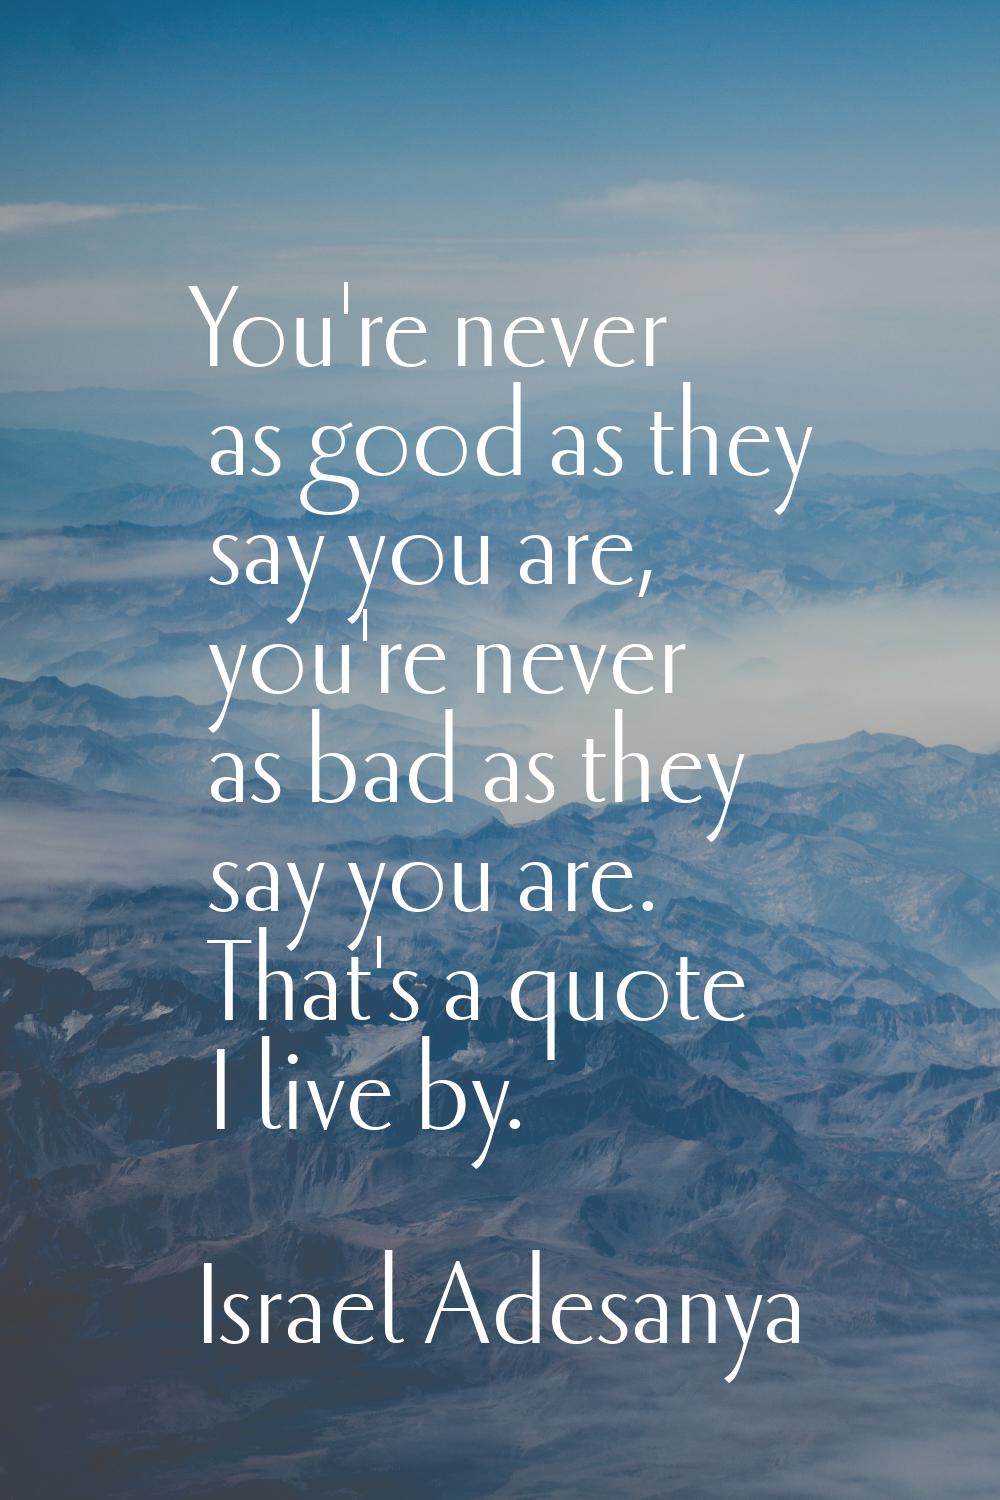 You're never as good as they say you are, you're never as bad as they say you are. That's a quote I